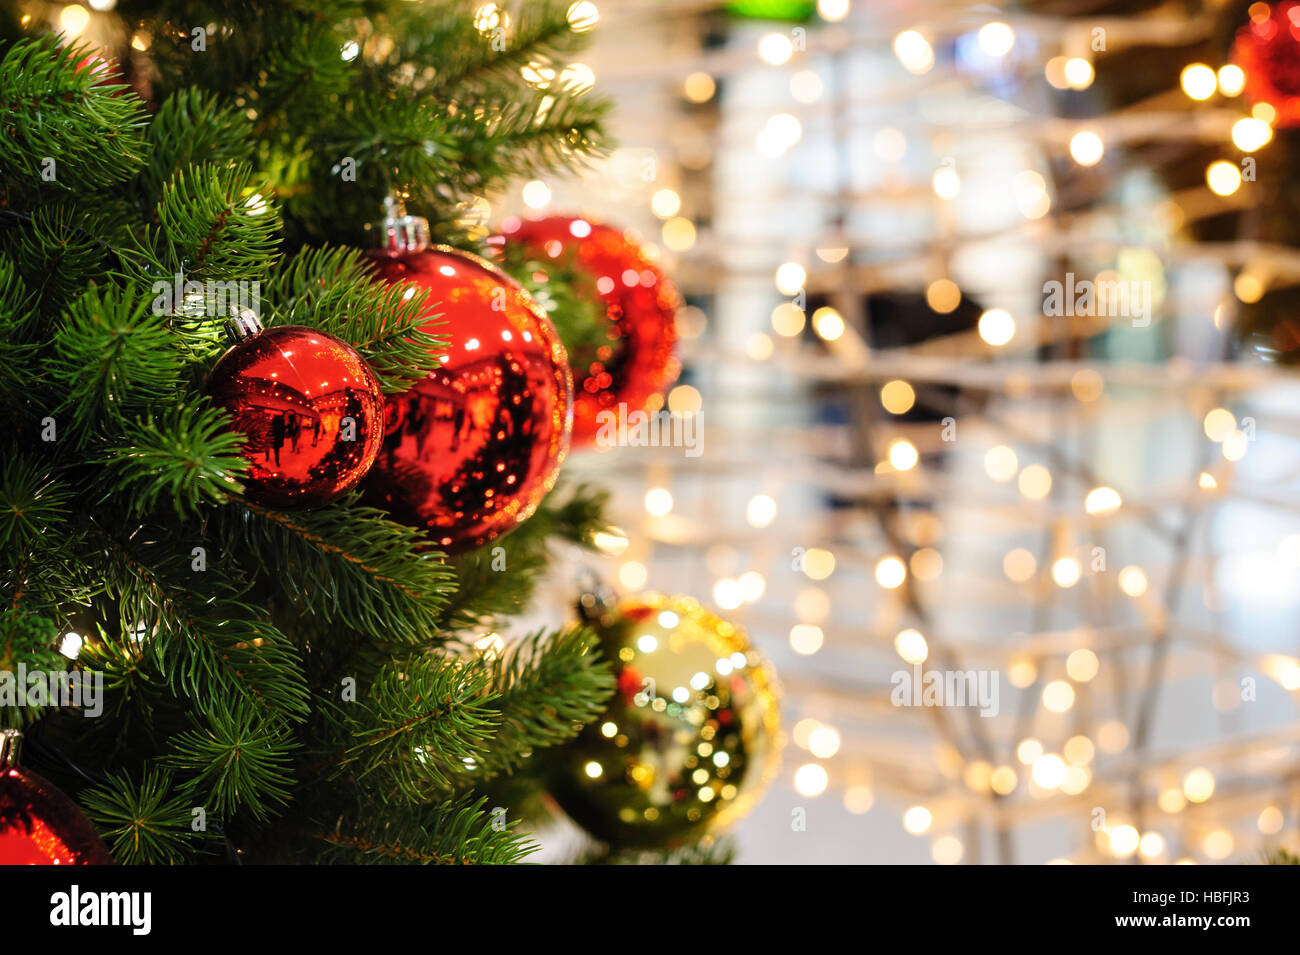 Toy red balls on the Christmas tree Stock Photo